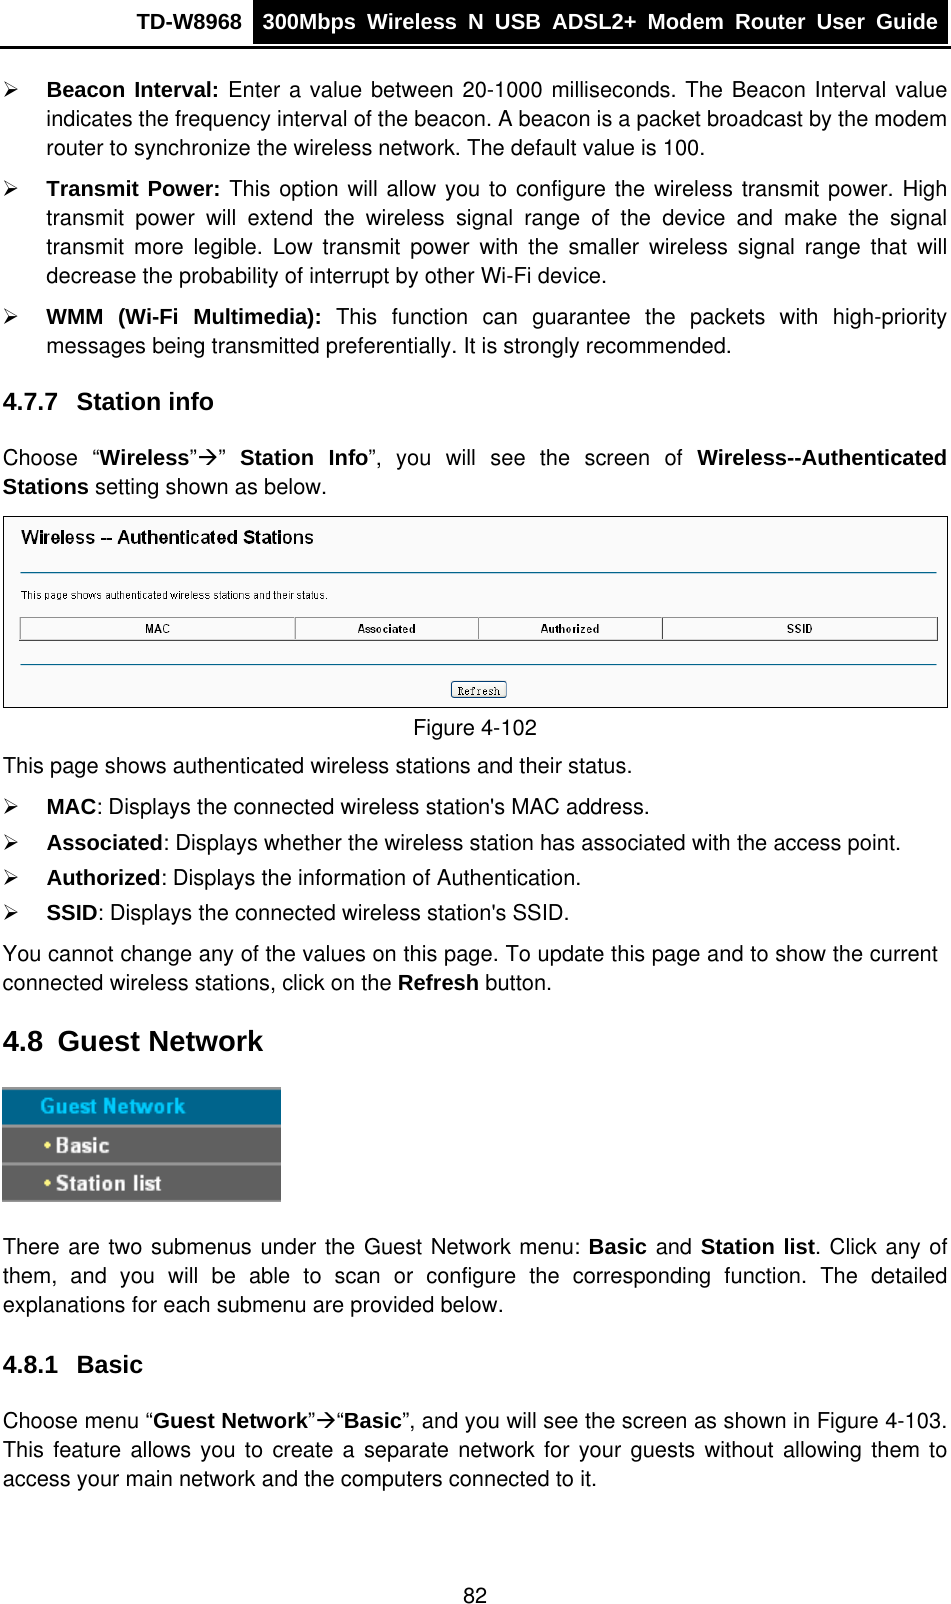 TD-W8968  300Mbps Wireless N USB ADSL2+ Modem Router User Guide  ¾ Beacon Interval: Enter a value between 20-1000 milliseconds. The Beacon Interval value indicates the frequency interval of the beacon. A beacon is a packet broadcast by the modem router to synchronize the wireless network. The default value is 100. ¾ Transmit Power: This option will allow you to configure the wireless transmit power. High transmit power will extend the wireless signal range of the device and make the signal transmit more legible. Low transmit power with the smaller wireless signal range that will decrease the probability of interrupt by other Wi-Fi device. ¾ WMM (Wi-Fi Multimedia): This function can guarantee the packets with high-priority messages being transmitted preferentially. It is strongly recommended. 4.7.7  Station info Choose “Wireless”Æ”  Station Info”, you will see the screen of Wireless--Authenticated Stations setting shown as below.  Figure 4-102 This page shows authenticated wireless stations and their status. ¾ MAC: Displays the connected wireless station&apos;s MAC address. ¾ Associated: Displays whether the wireless station has associated with the access point. ¾ Authorized: Displays the information of Authentication. ¾ SSID: Displays the connected wireless station&apos;s SSID. You cannot change any of the values on this page. To update this page and to show the current connected wireless stations, click on the Refresh button.   4.8  Guest Network  There are two submenus under the Guest Network menu: Basic and Station list. Click any of them, and you will be able to scan or configure the corresponding function. The detailed explanations for each submenu are provided below. 4.8.1  Basic Choose menu “Guest Network”Æ“Basic”, and you will see the screen as shown in Figure 4-103. This feature allows you to create a separate network for your guests without allowing them to access your main network and the computers connected to it.  82 